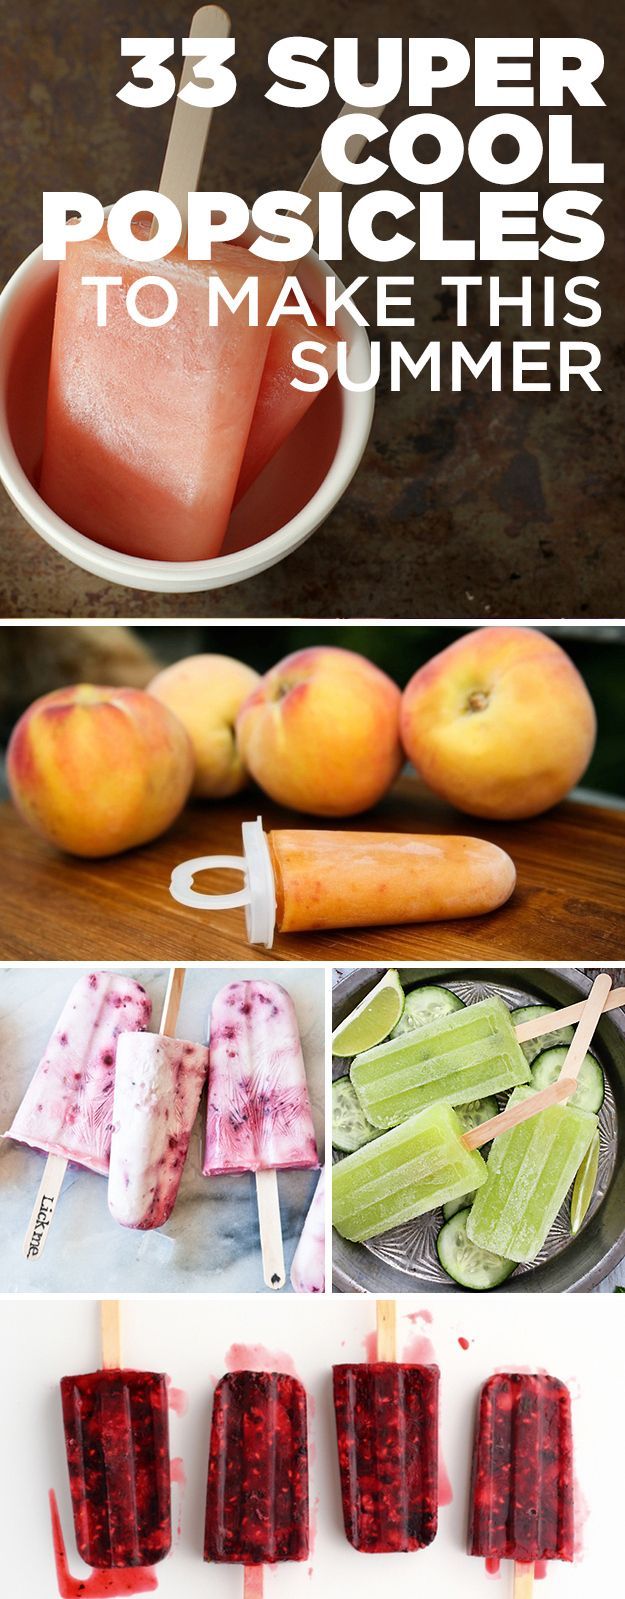 33 Super-Cool Popsicles To Make This Summer